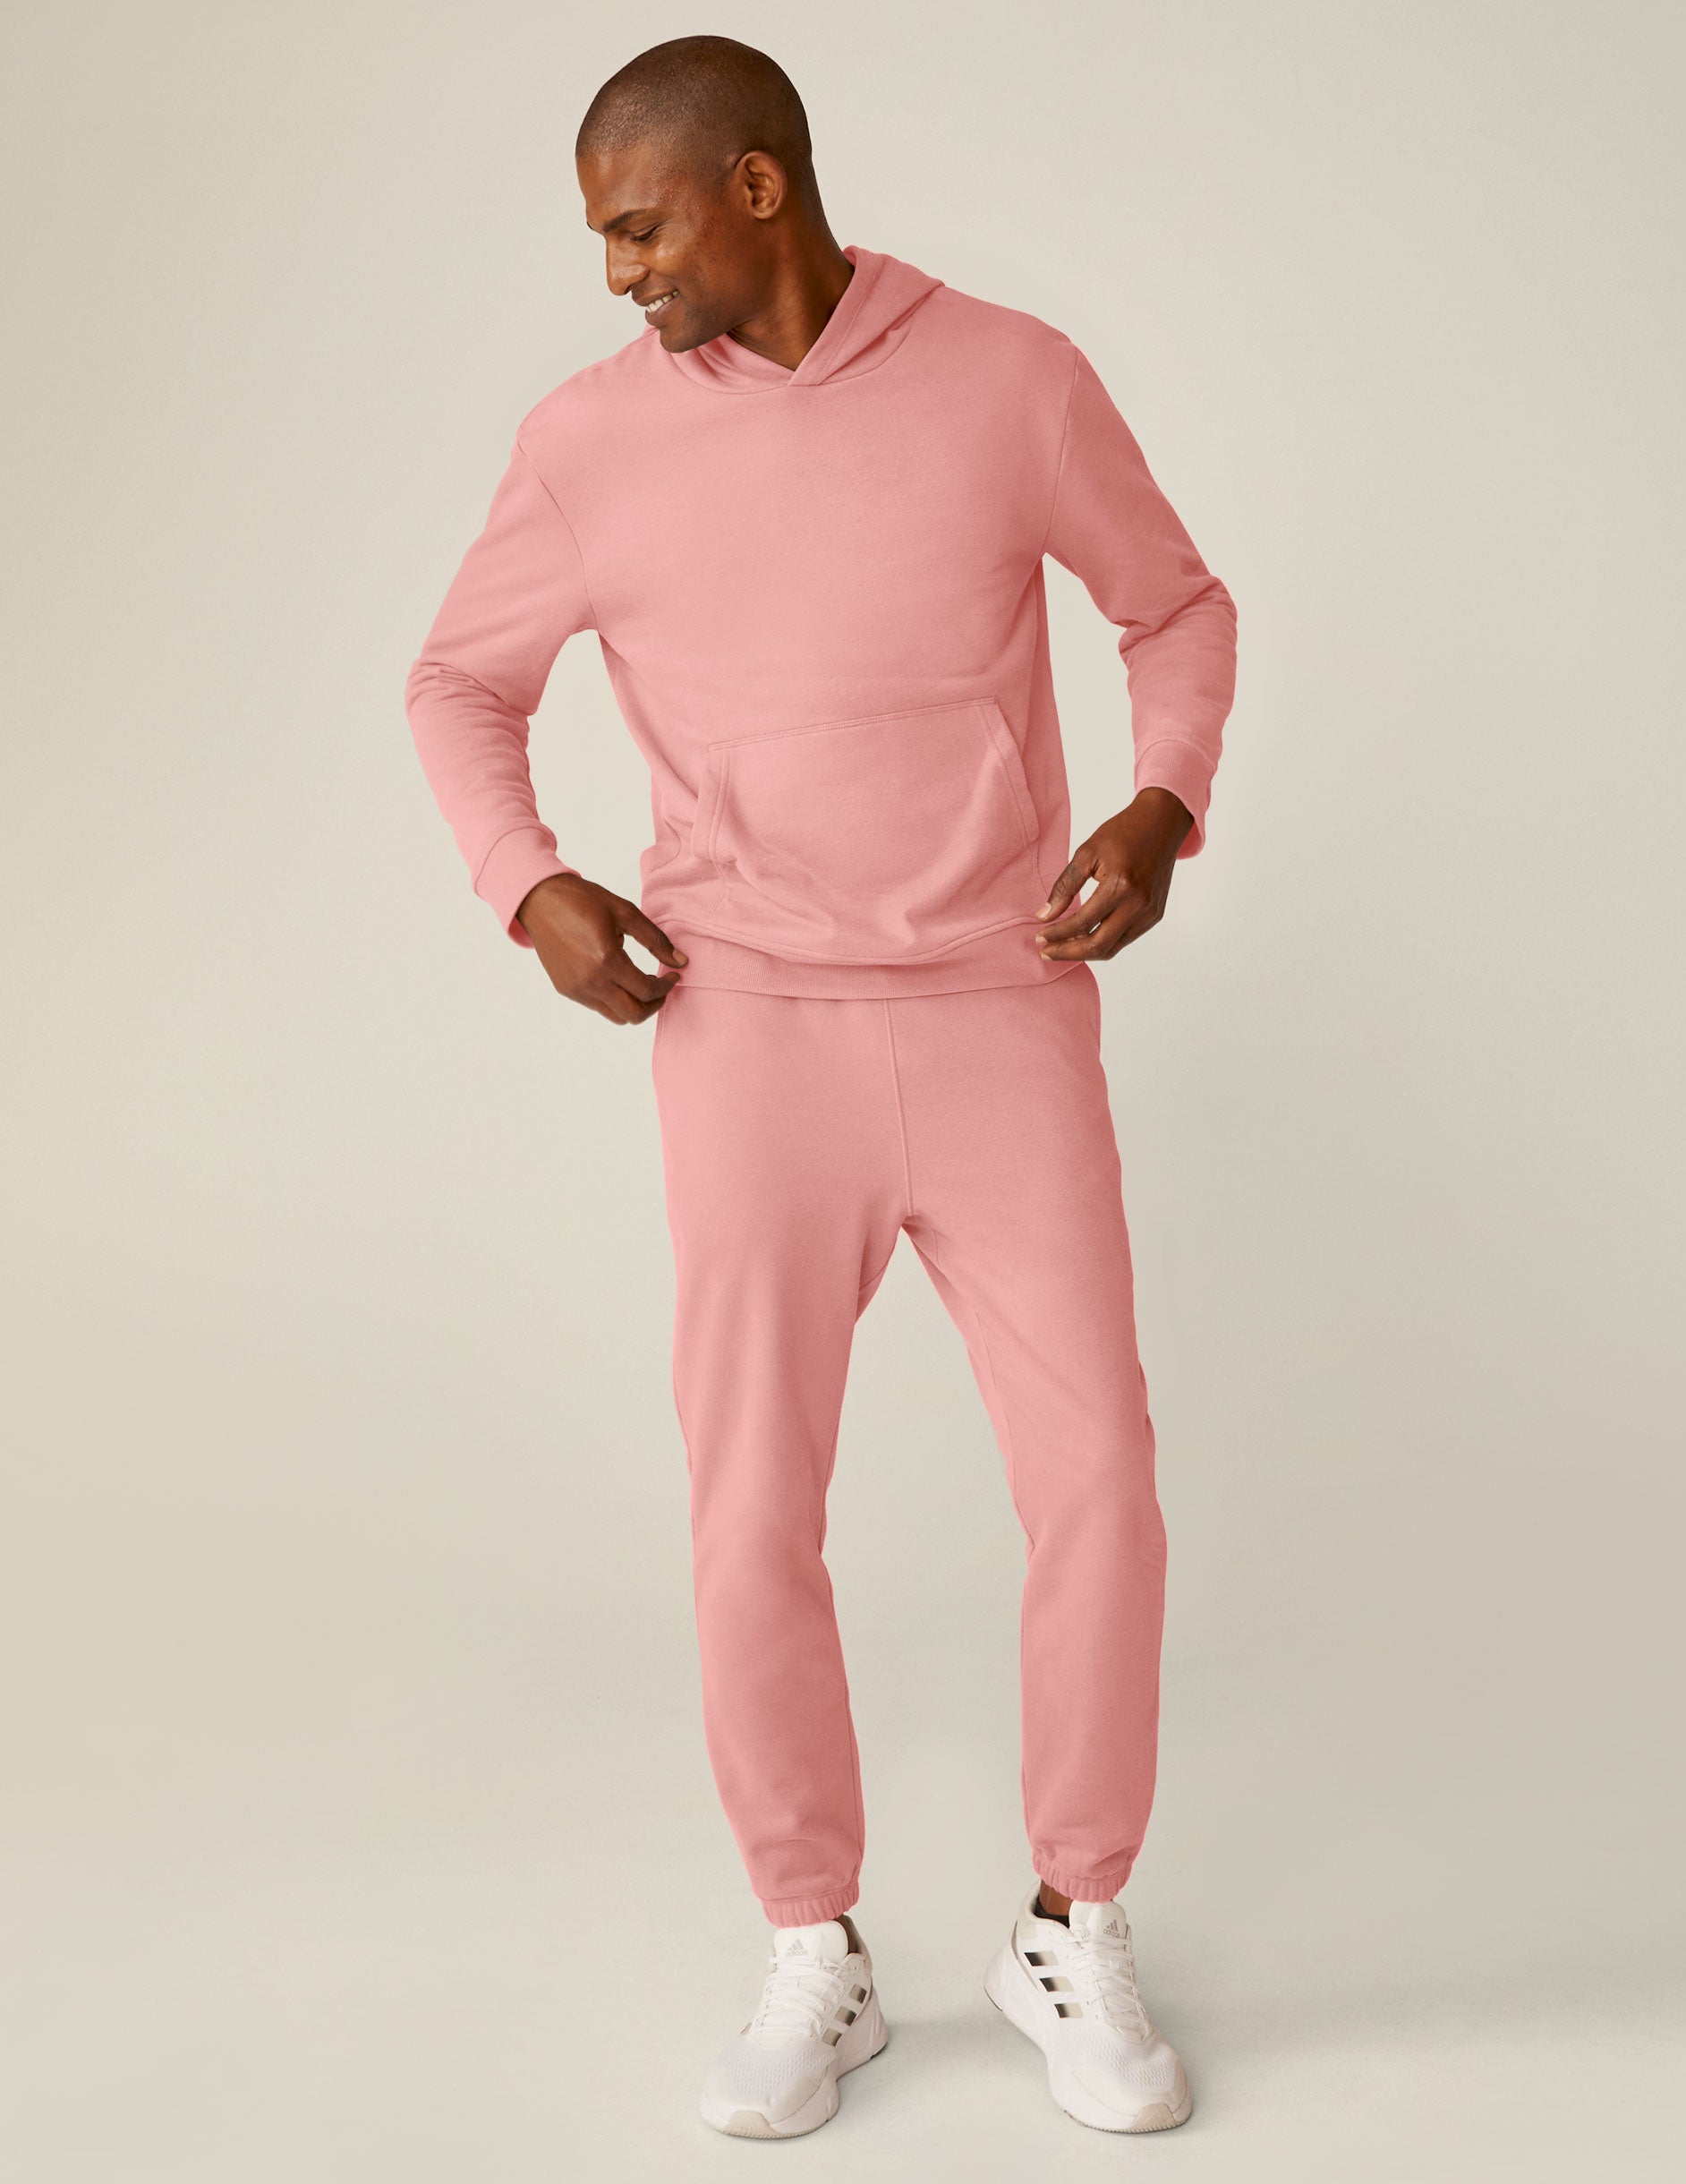 pink men's sweatpants with pockets. 